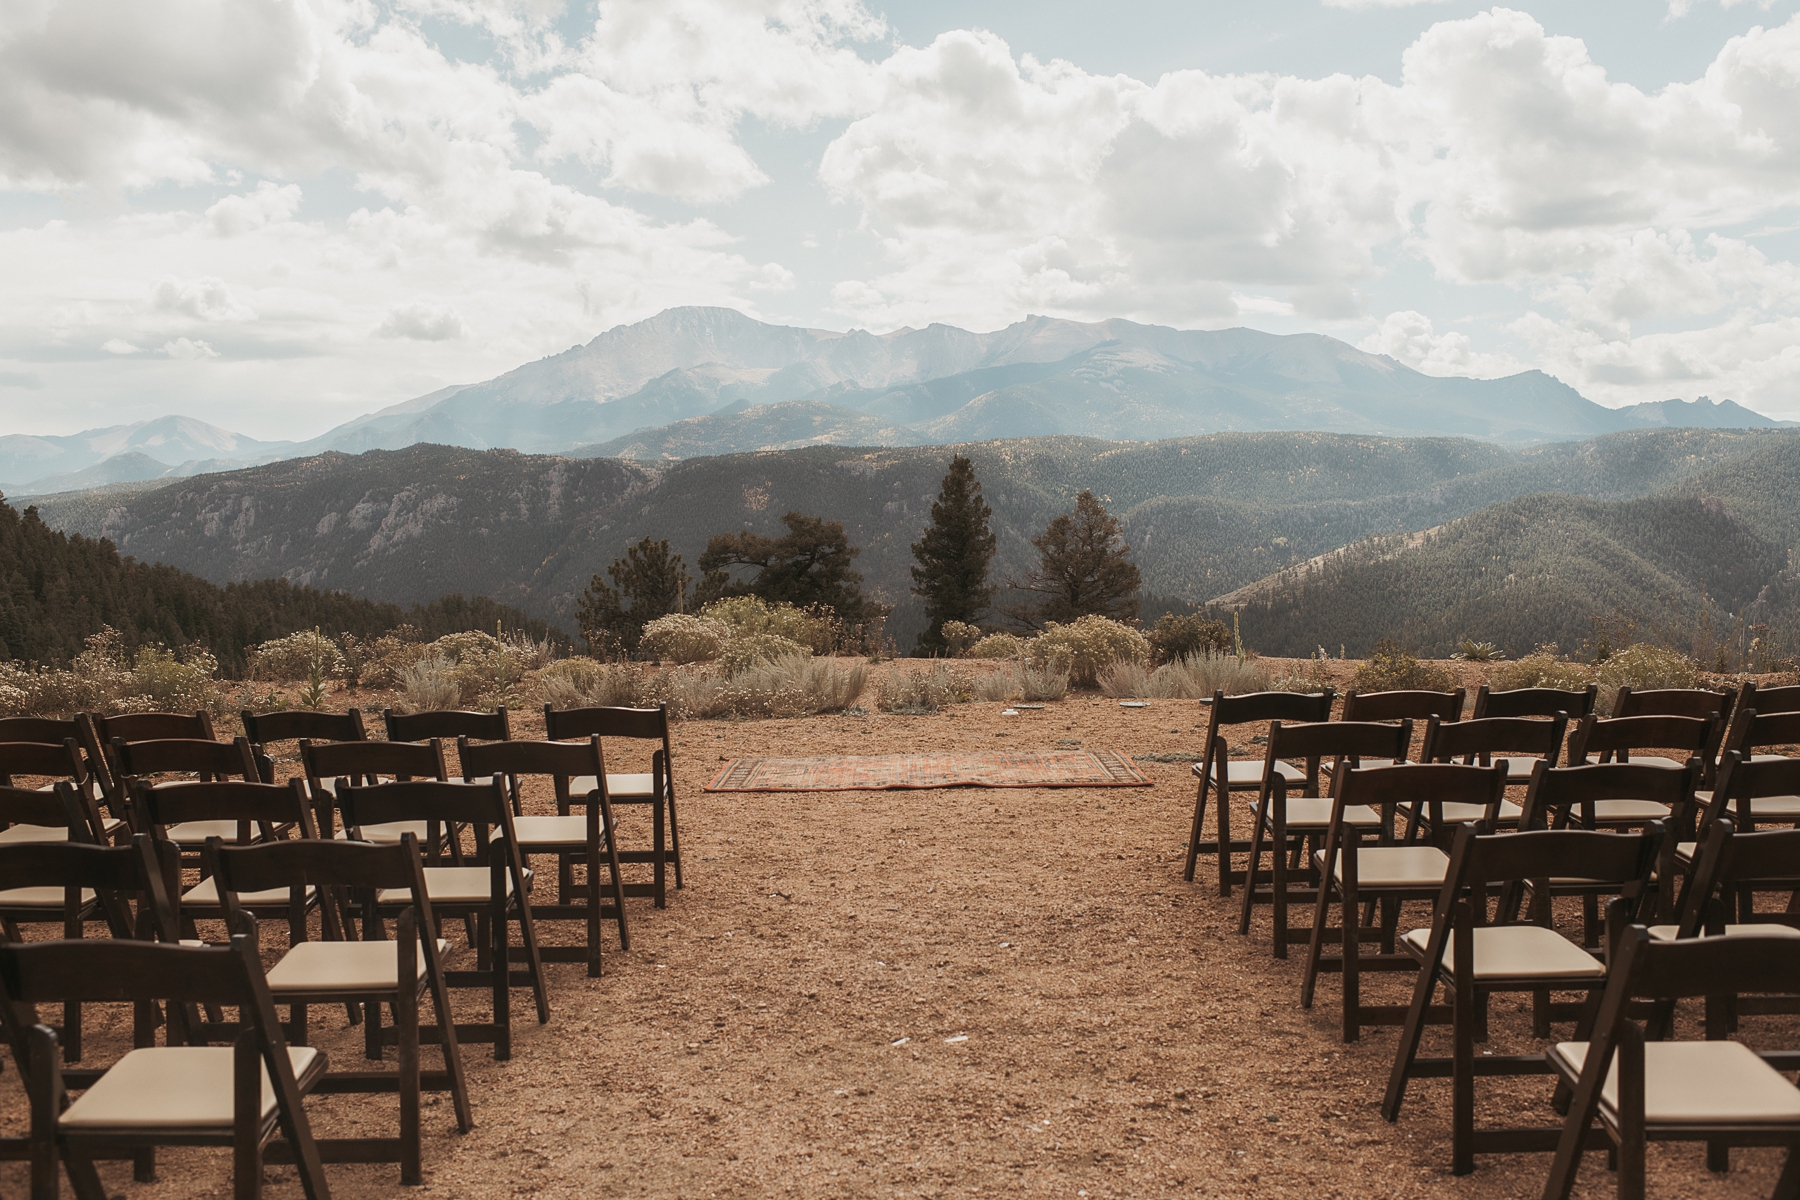 Ceremony space looking out at mountains at Airbnb wedding venue in Colorado